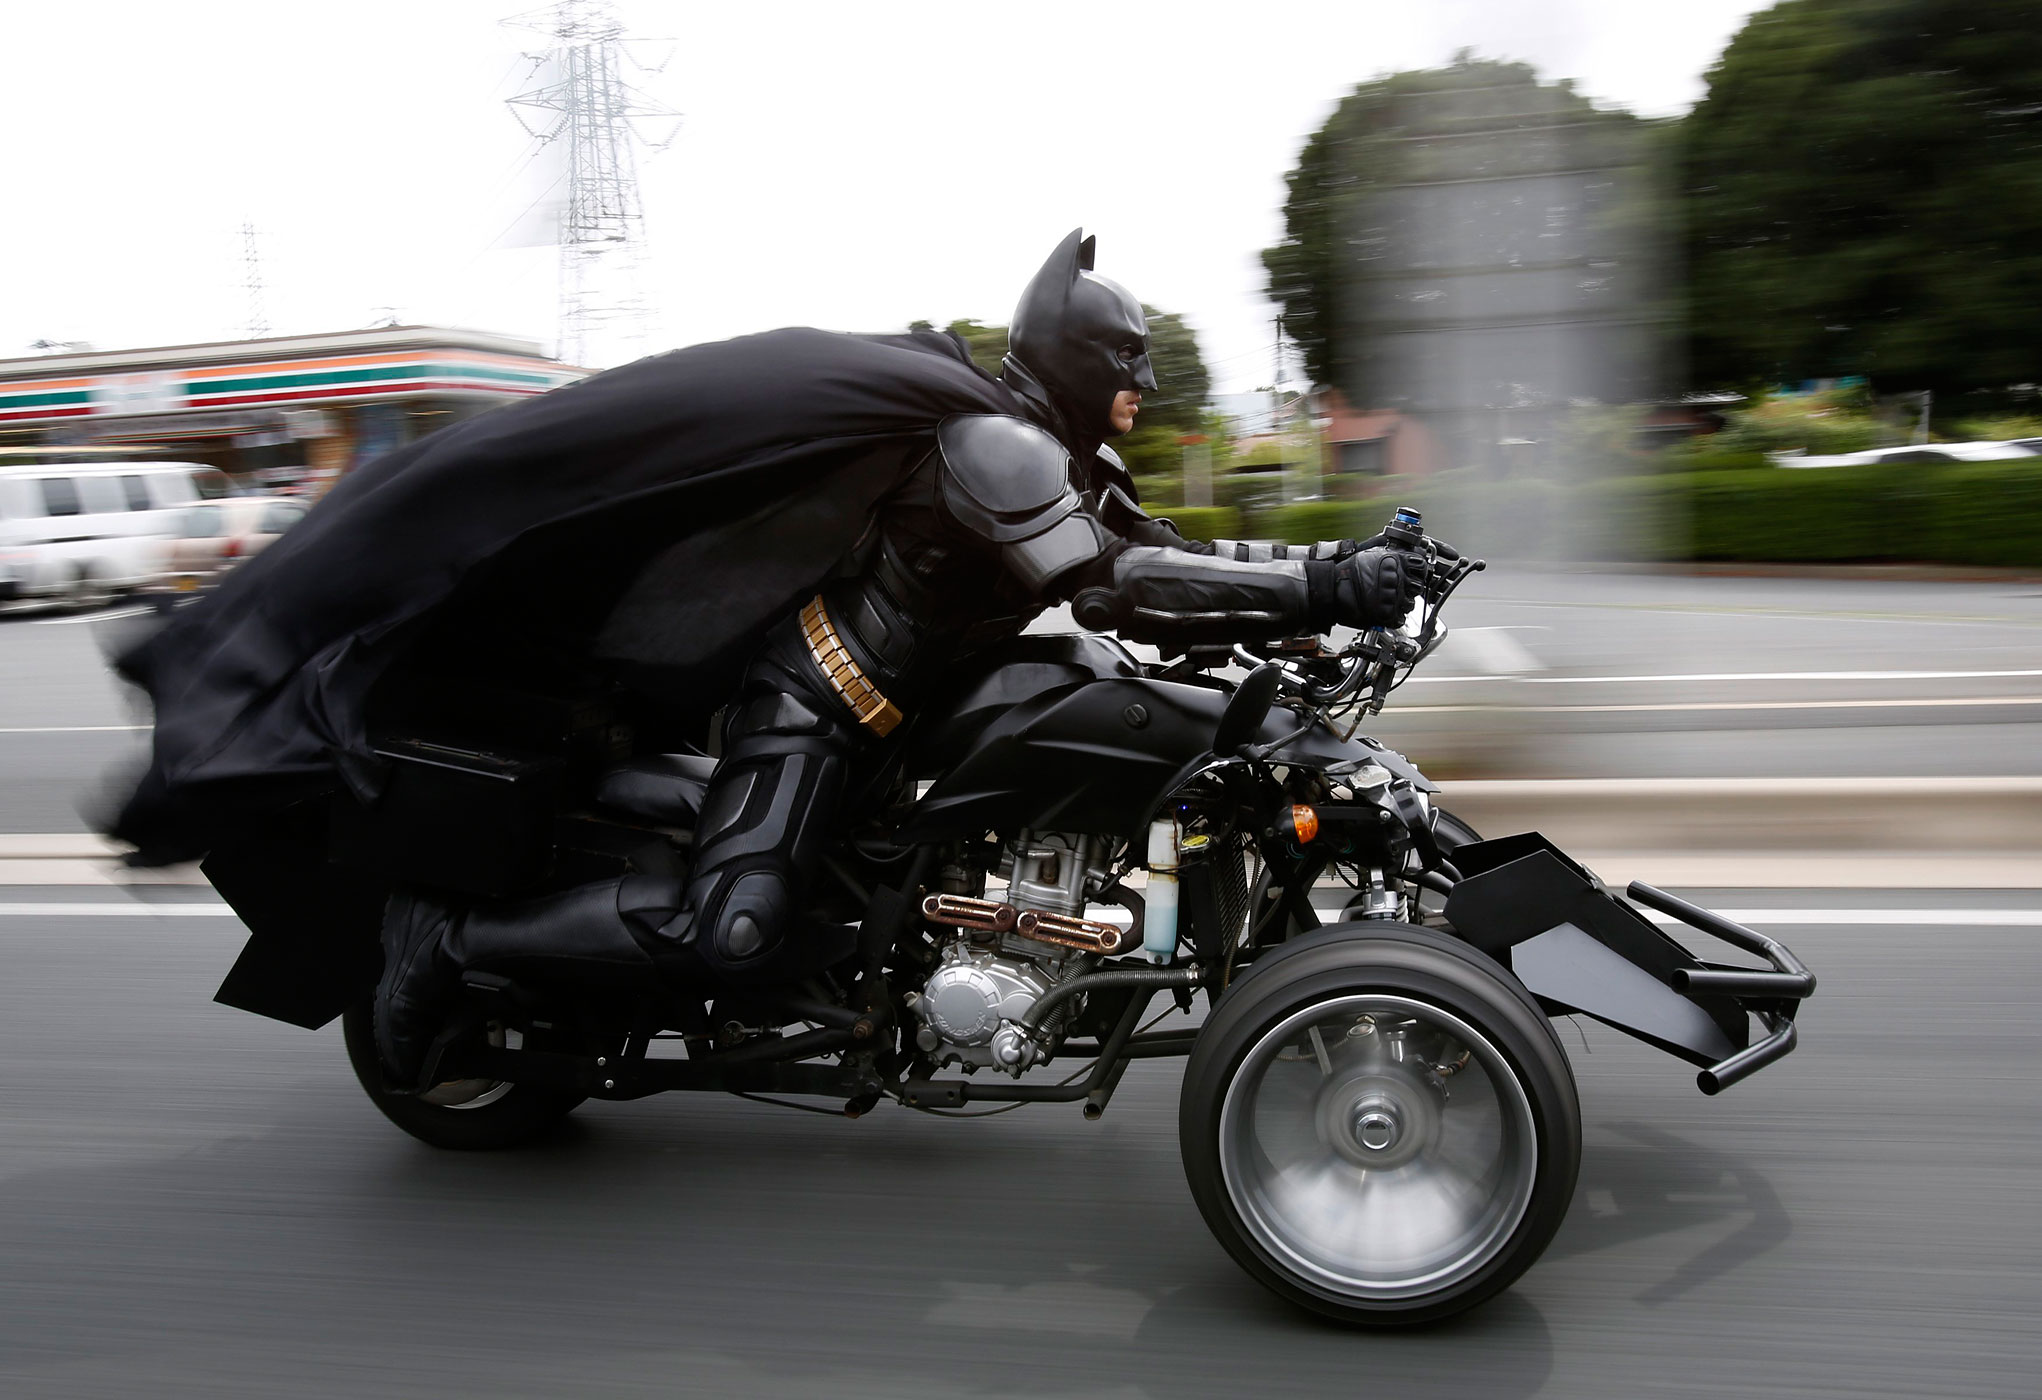 A 41-year-old man going by the name of Chibatman rides his "Chibatpod" on the road in Chiba, east of Tokyo